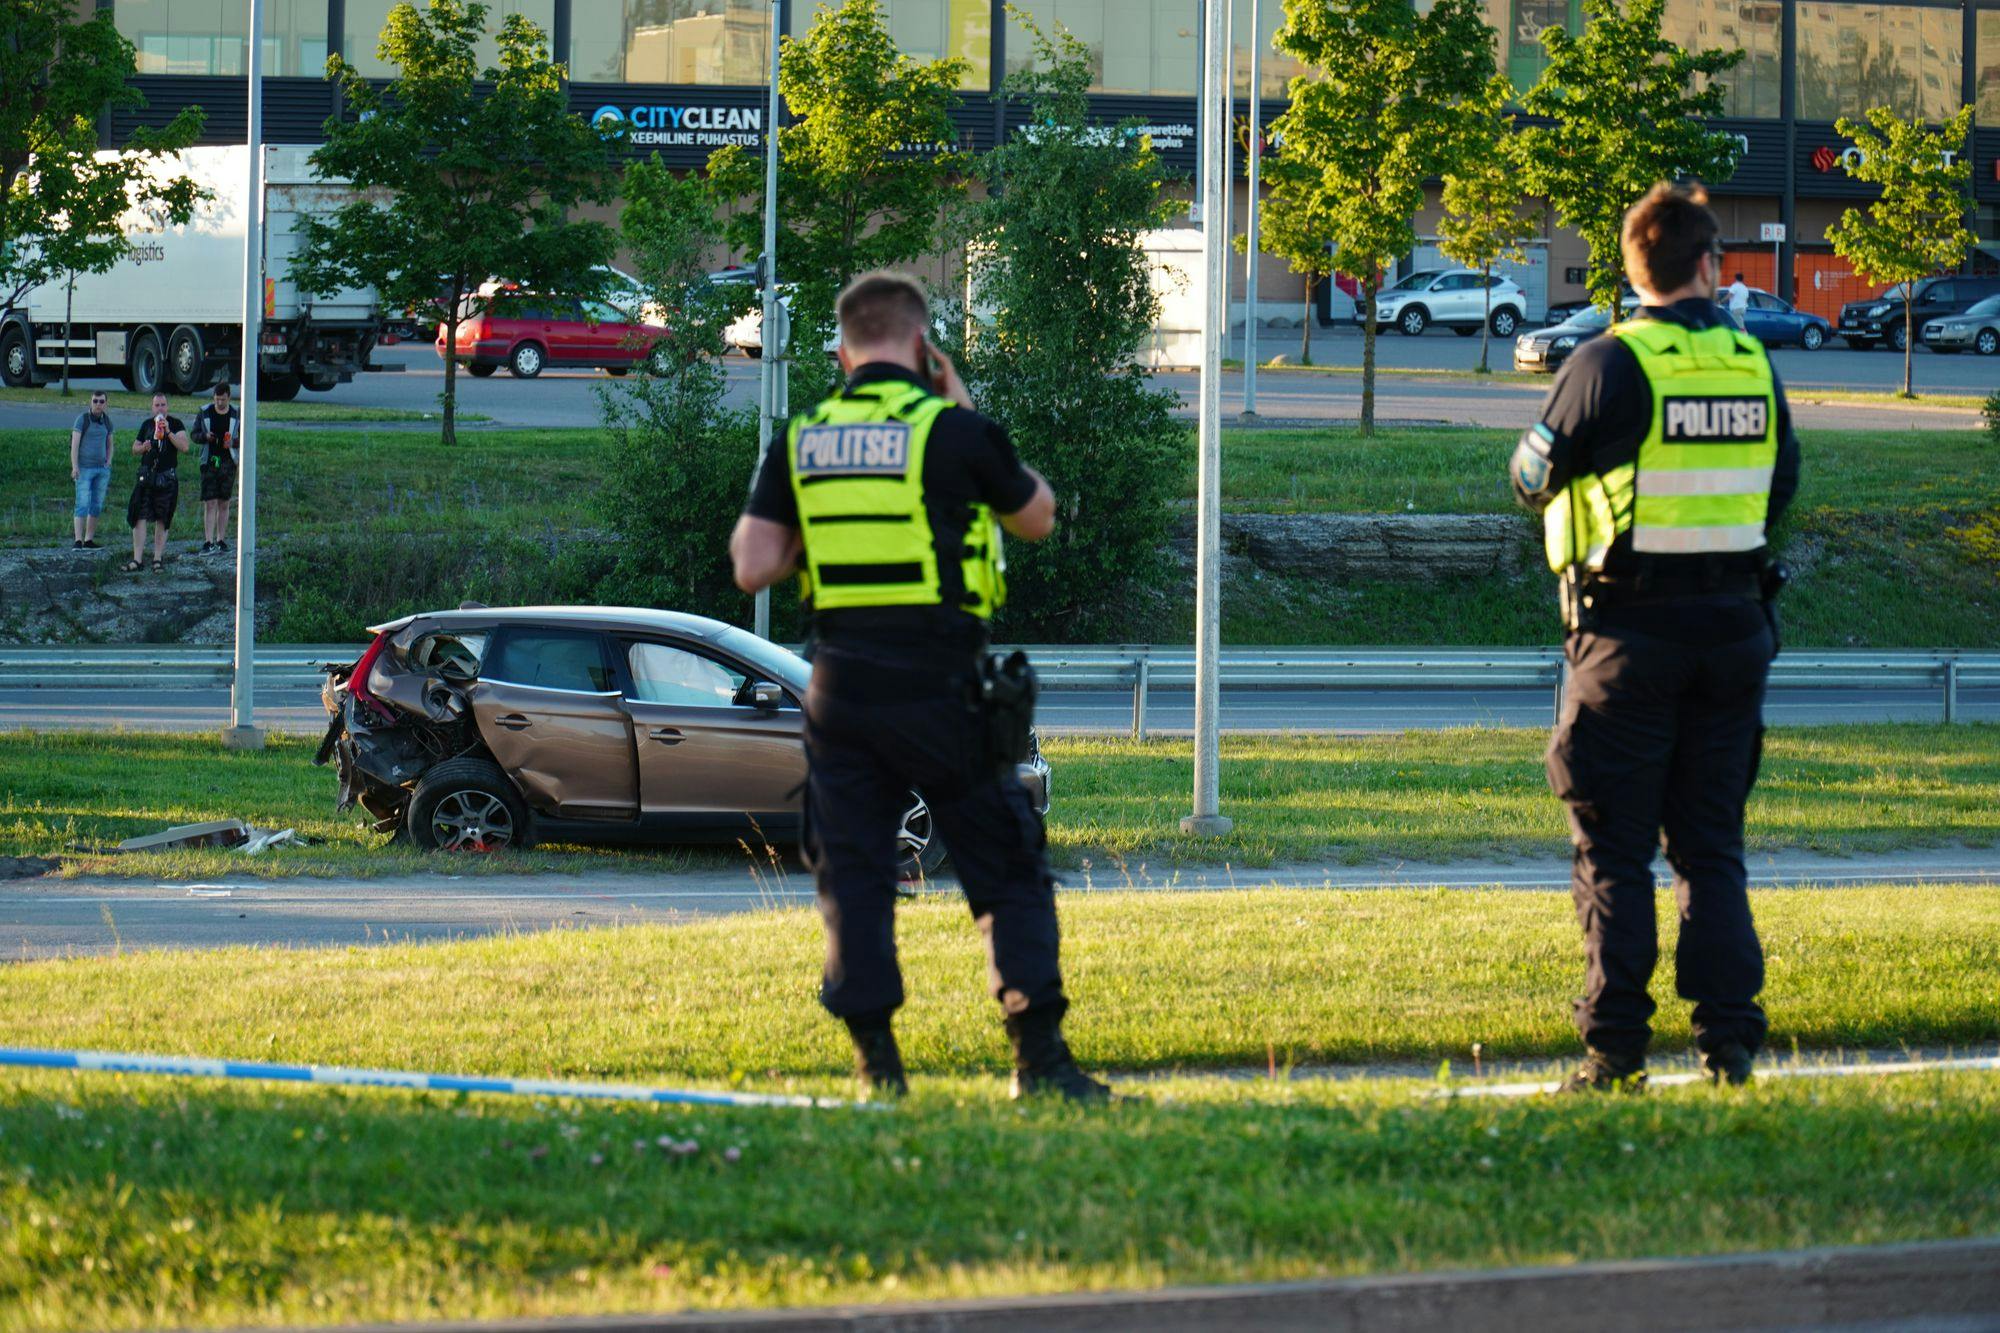 Two police offers in front of a car accident